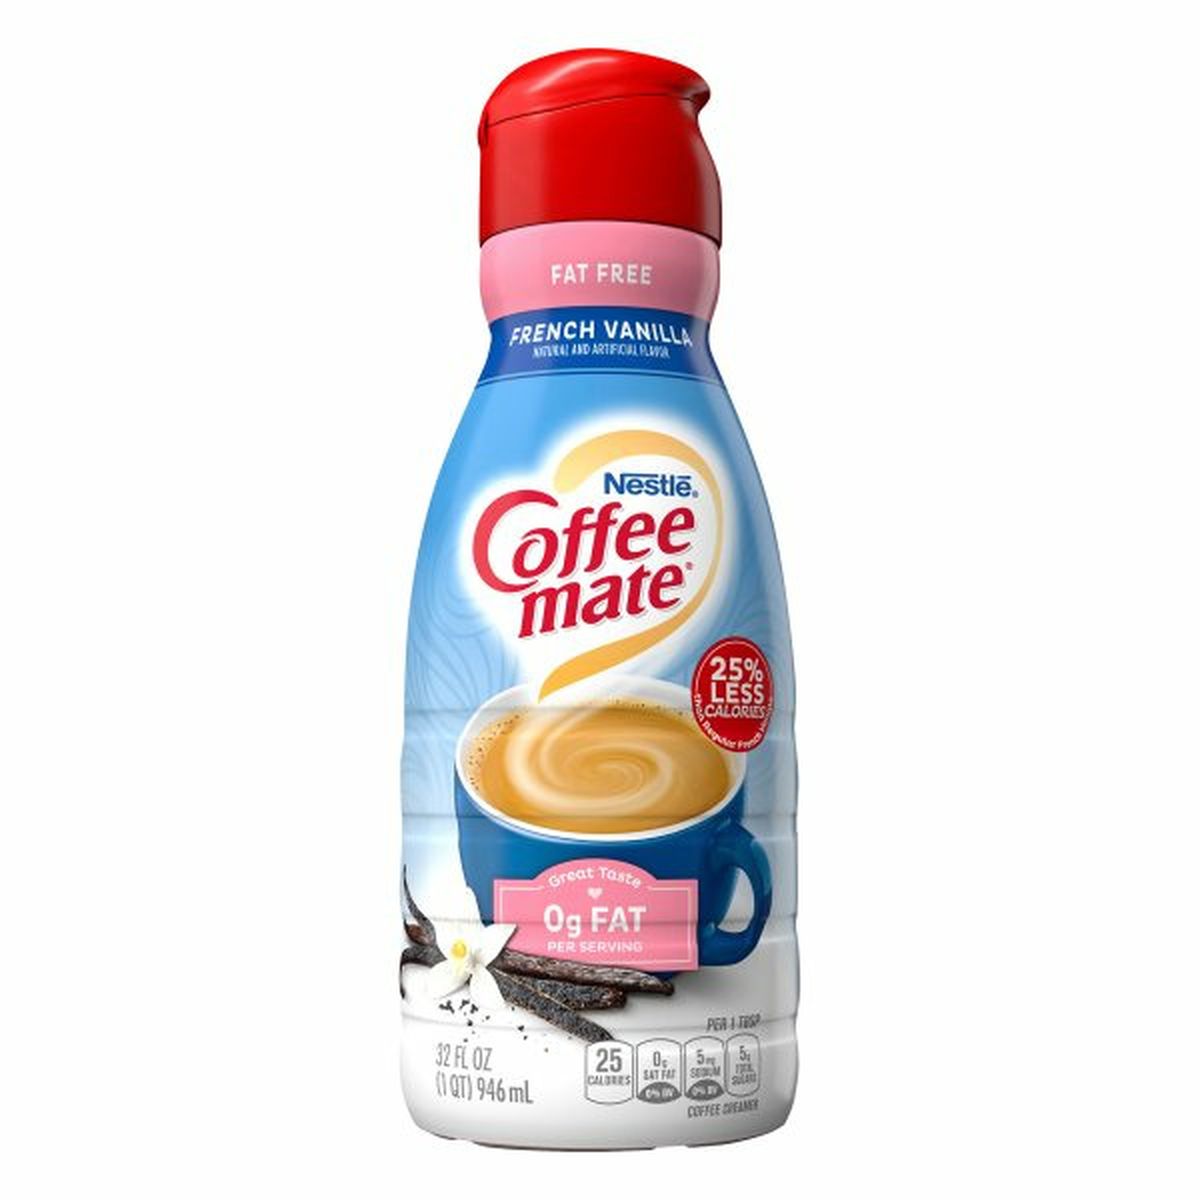 Calories in Coffee mate Coffee Creamer, Fat Free, French Vanilla